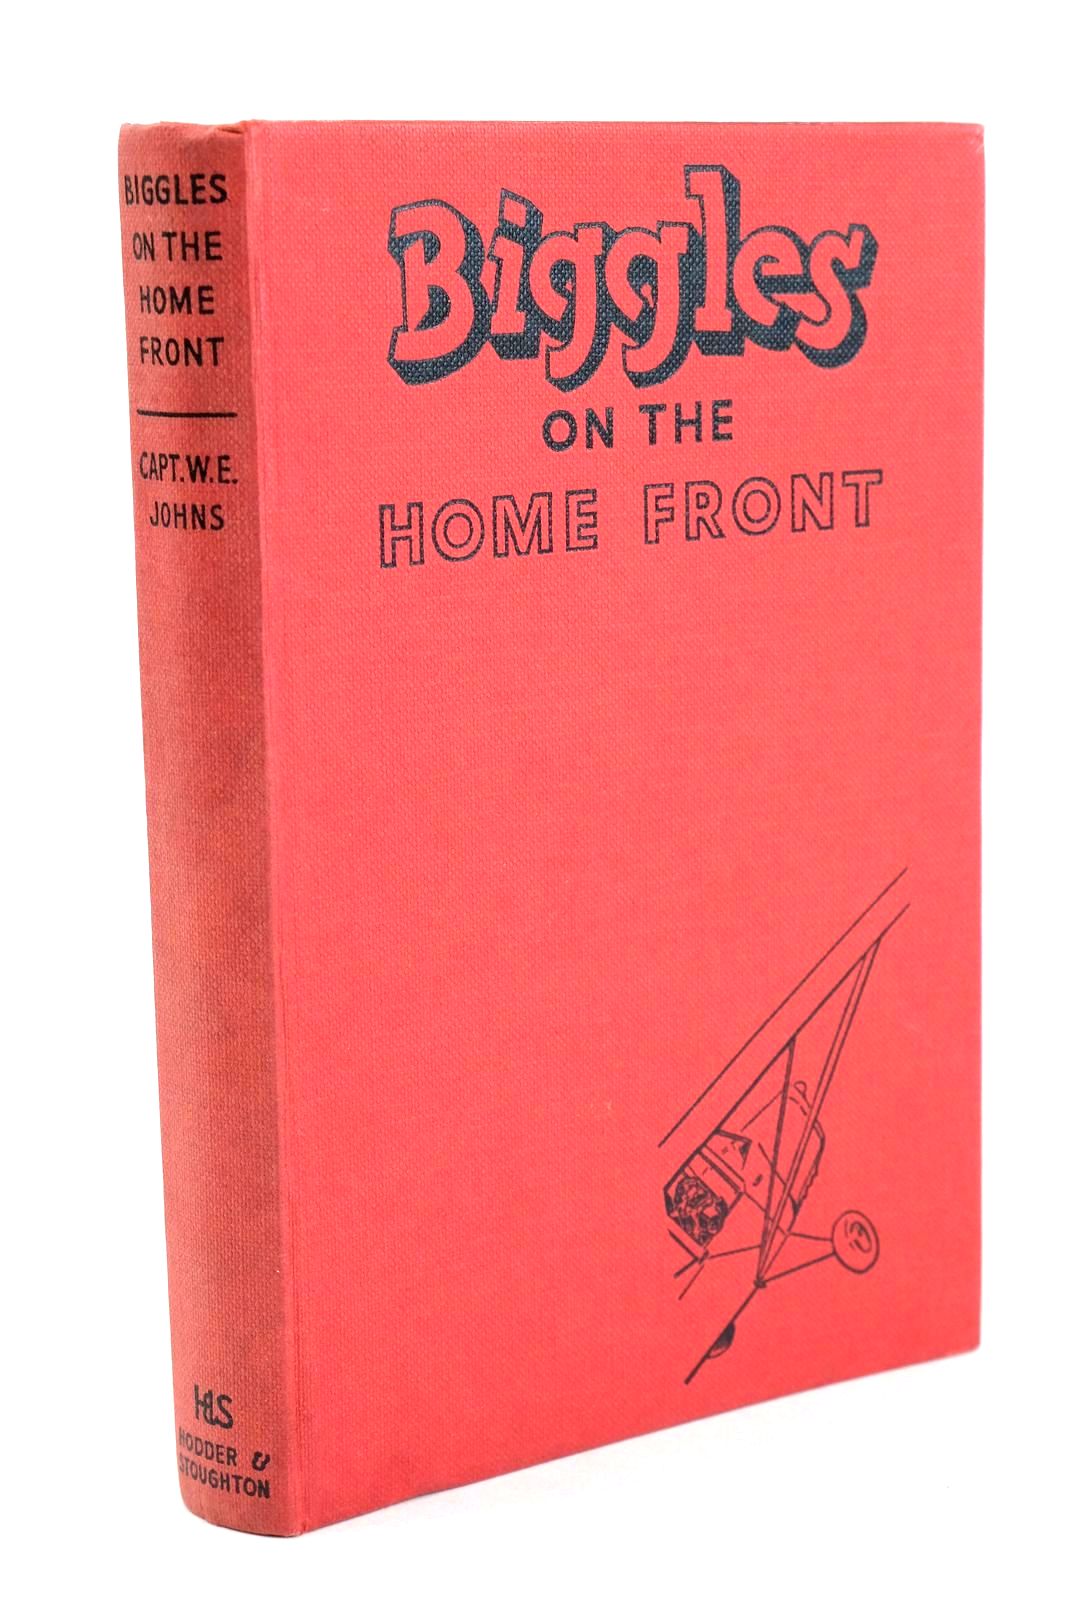 Photo of BIGGLES ON THE HOME FRONT written by Johns, W.E. illustrated by Stead,  published by Hodder &amp; Stoughton (STOCK CODE: 1326194)  for sale by Stella & Rose's Books